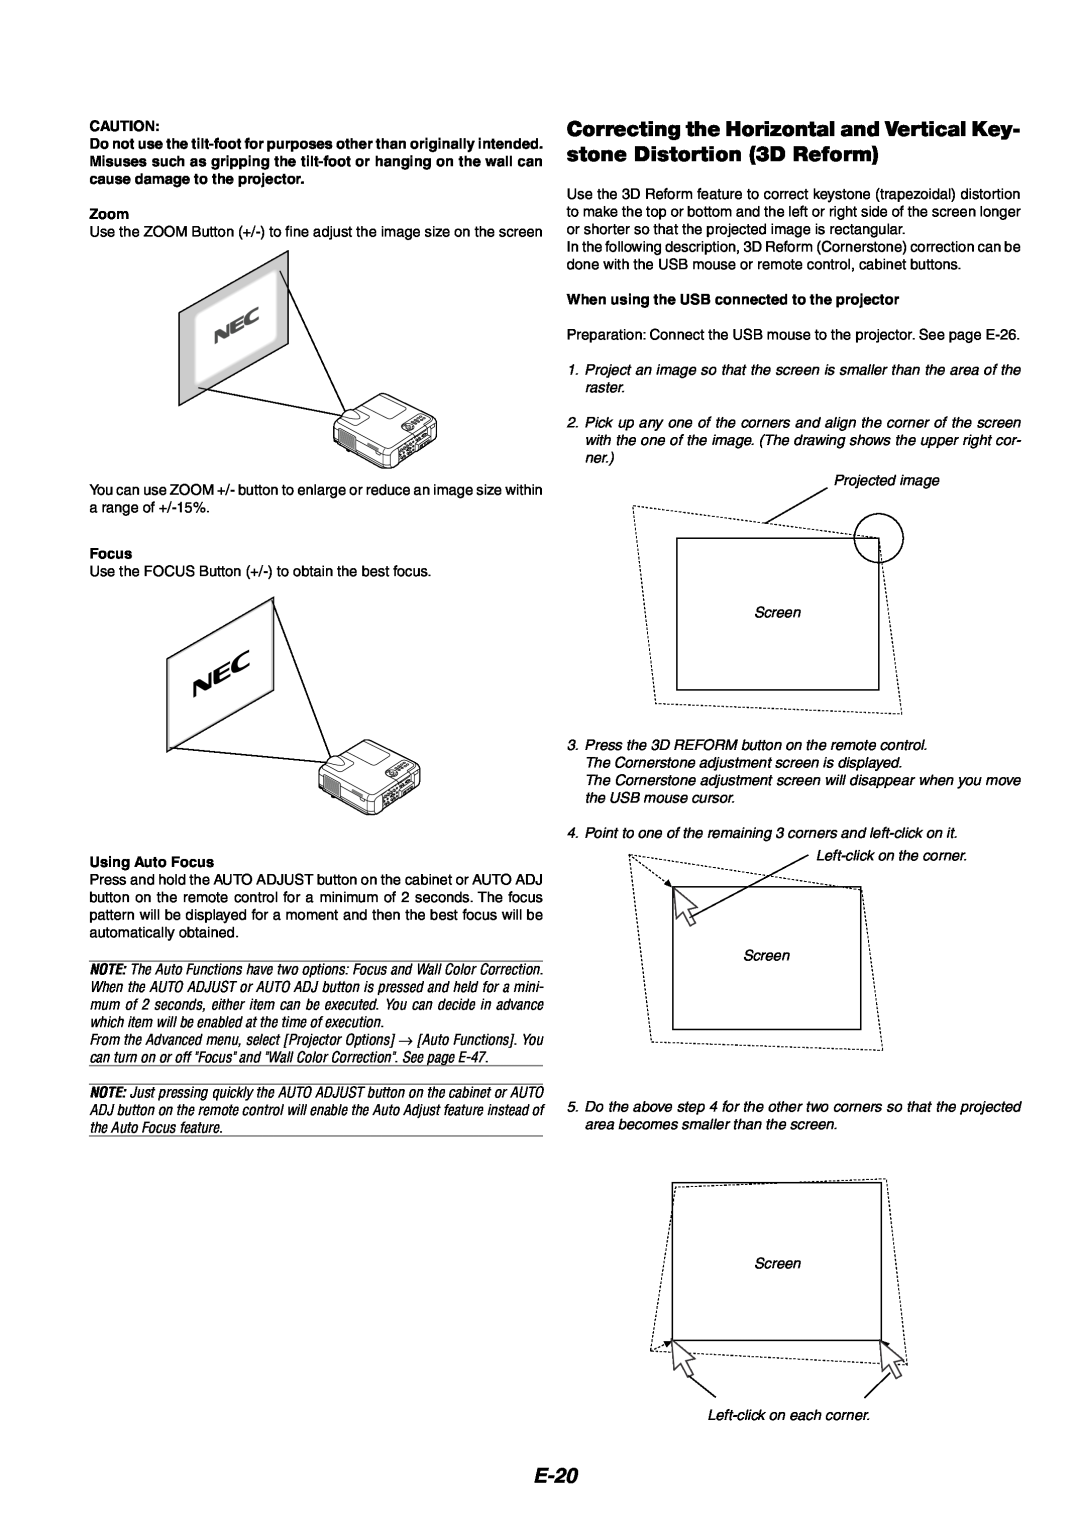 NEC MT1060 user manual E-20, Zoom, When using the USB connected to the projector, Using Auto Focus 